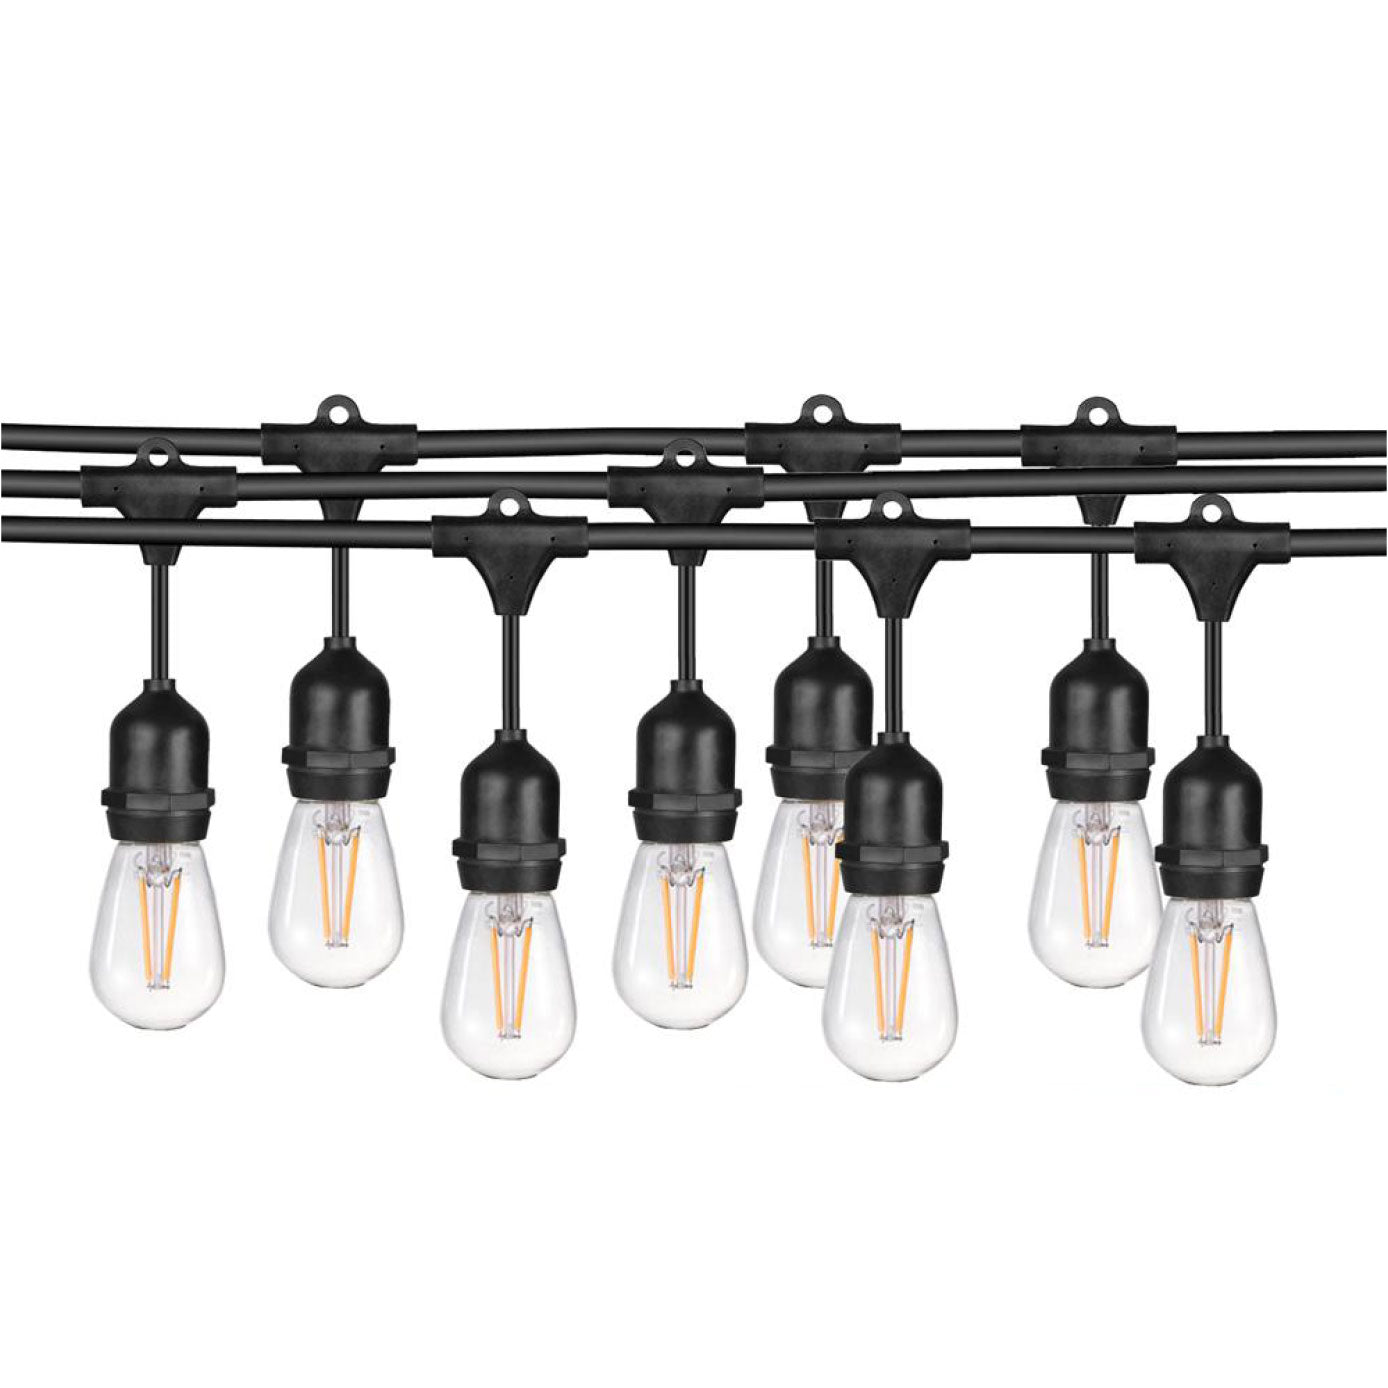 Sunlite 80572 48ft Outdoor String Lights, 1.5W Commercial Grade, Waterproof, Connectable Strands, UL Listed, 15 Hanging Sockets, Shatterproof LED Edison Bulbs Included, 2700K Warm White